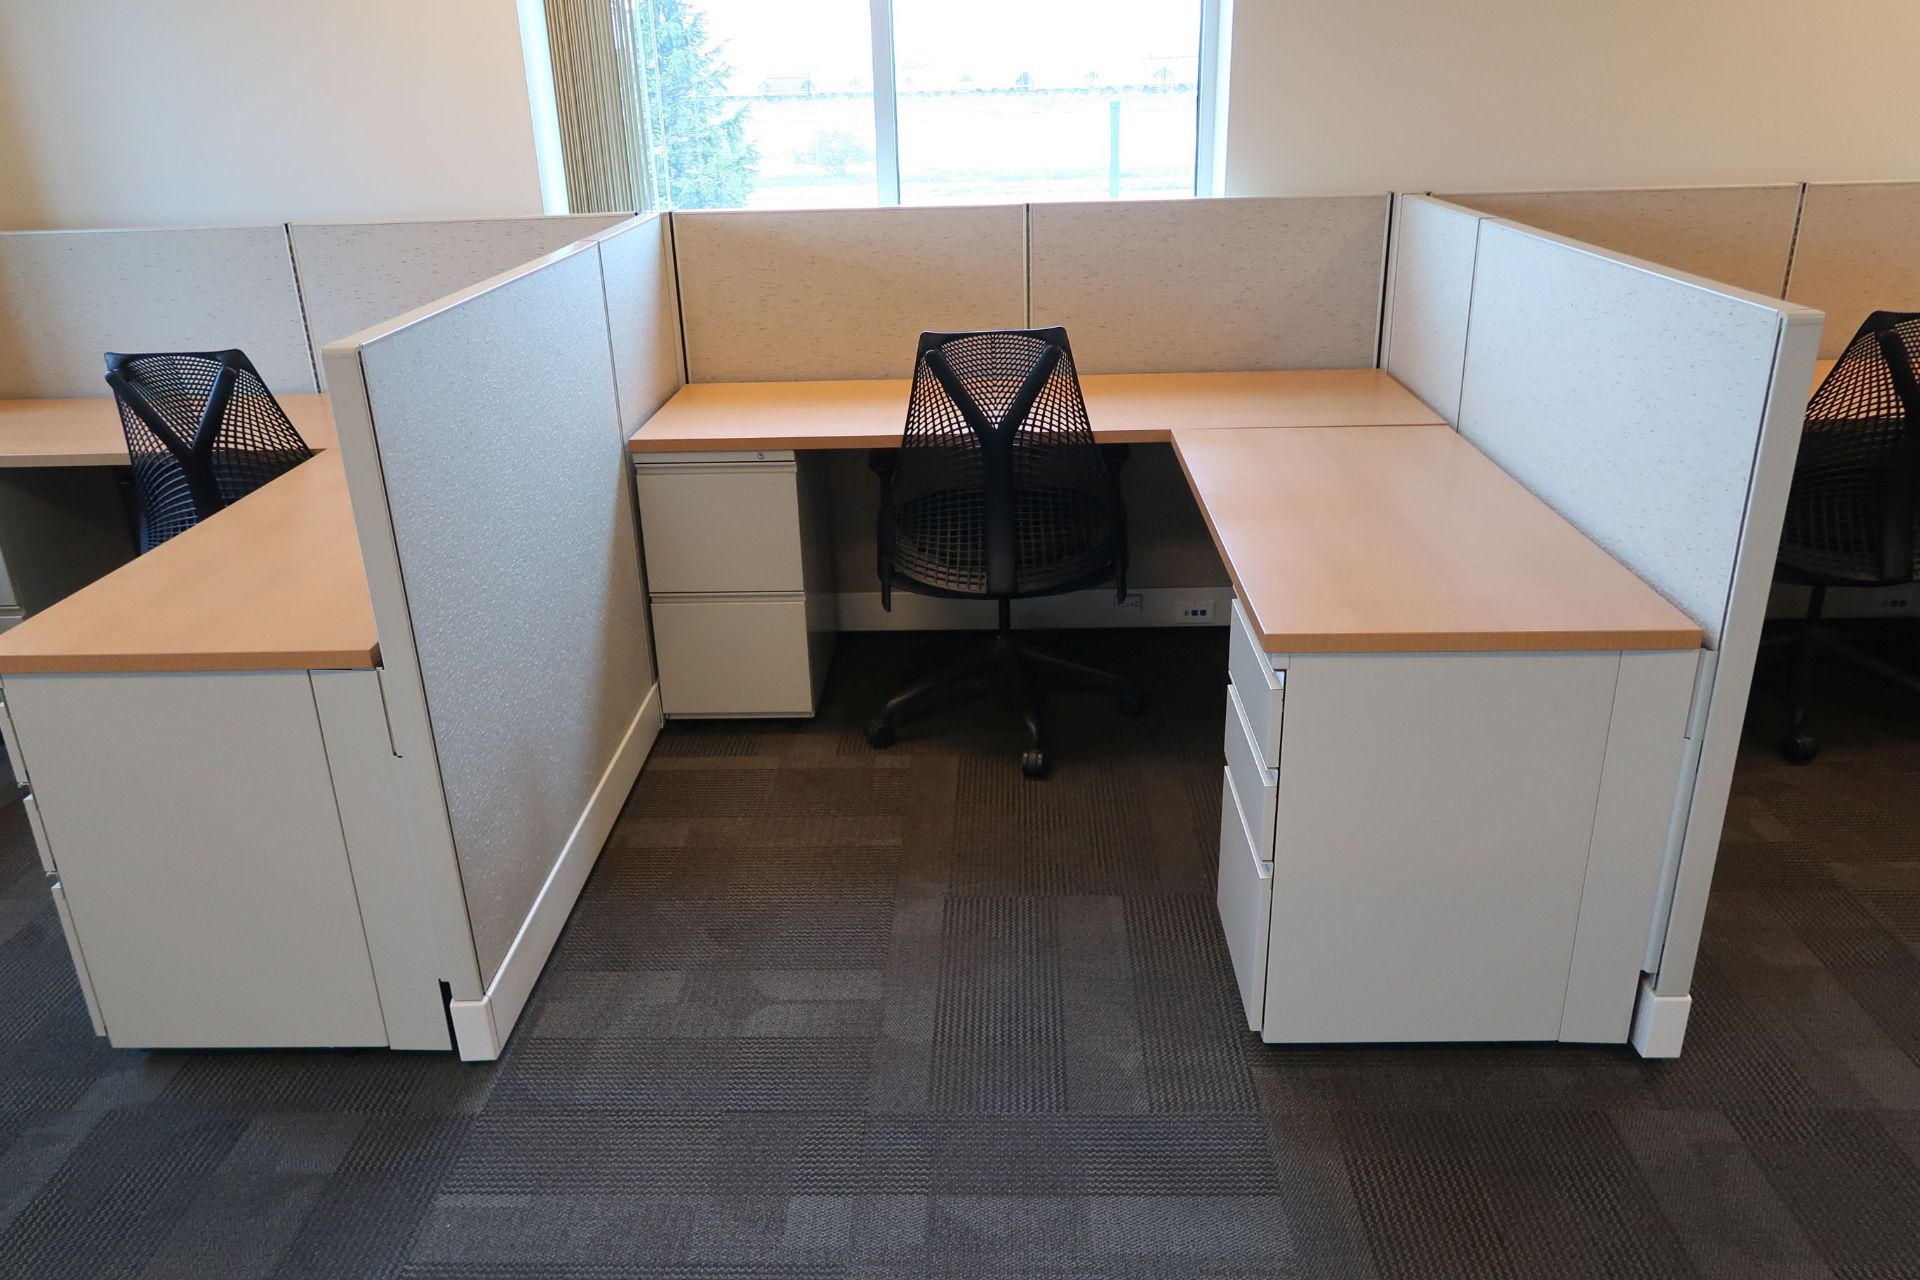 (LOT) 4-PERSON HERMAN MILLER CUBICLE SET 47" HIGH WALLS WITH CHAIRS - Image 4 of 5